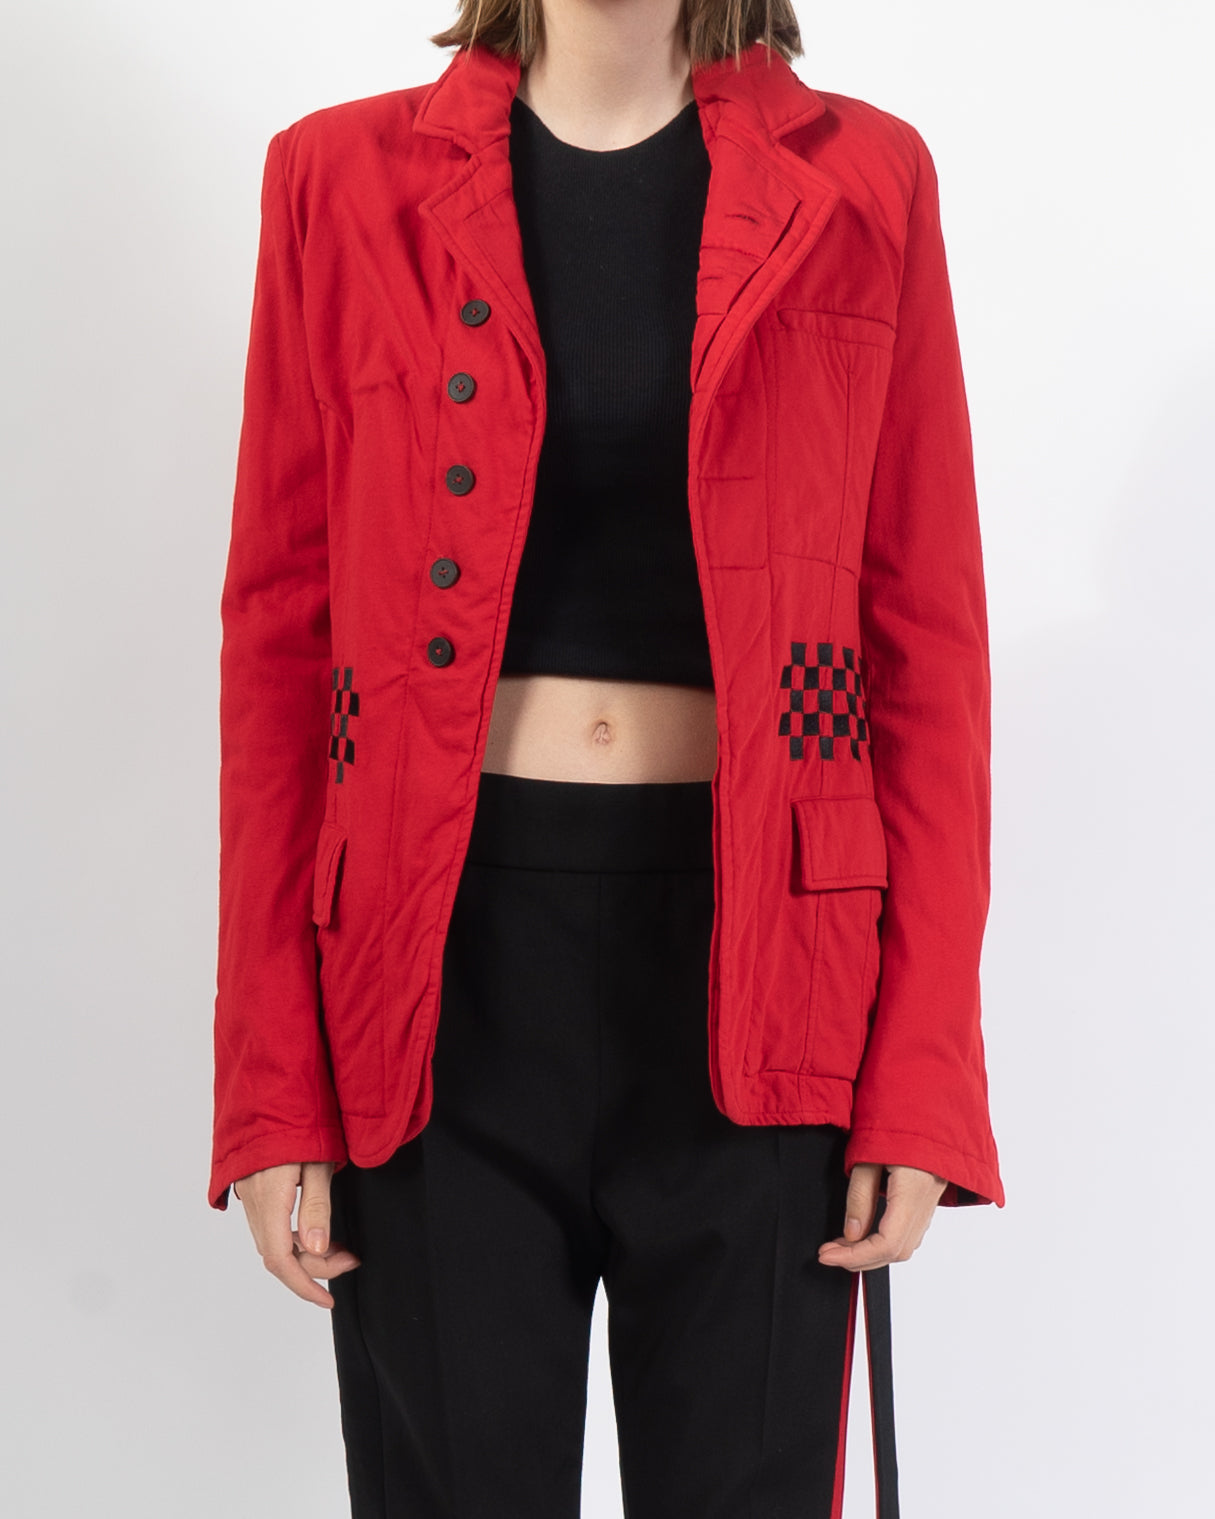 FW19 Red Embroidered Checkered Jersey Jacket